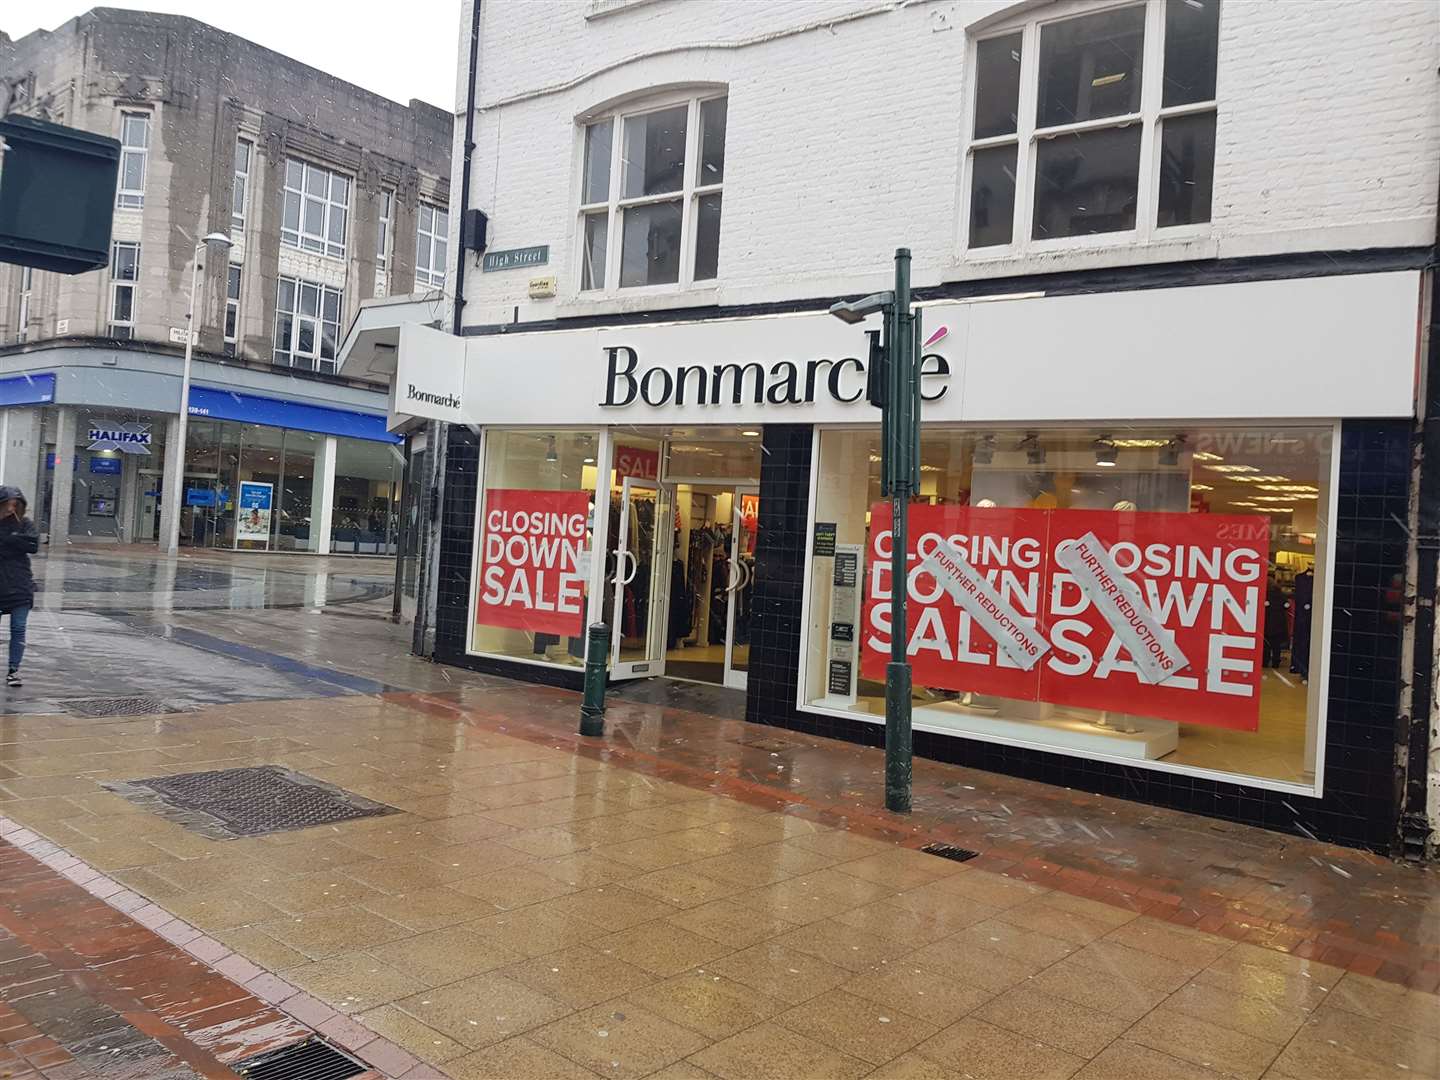 Bonmarche in Chatham High Street is closing down